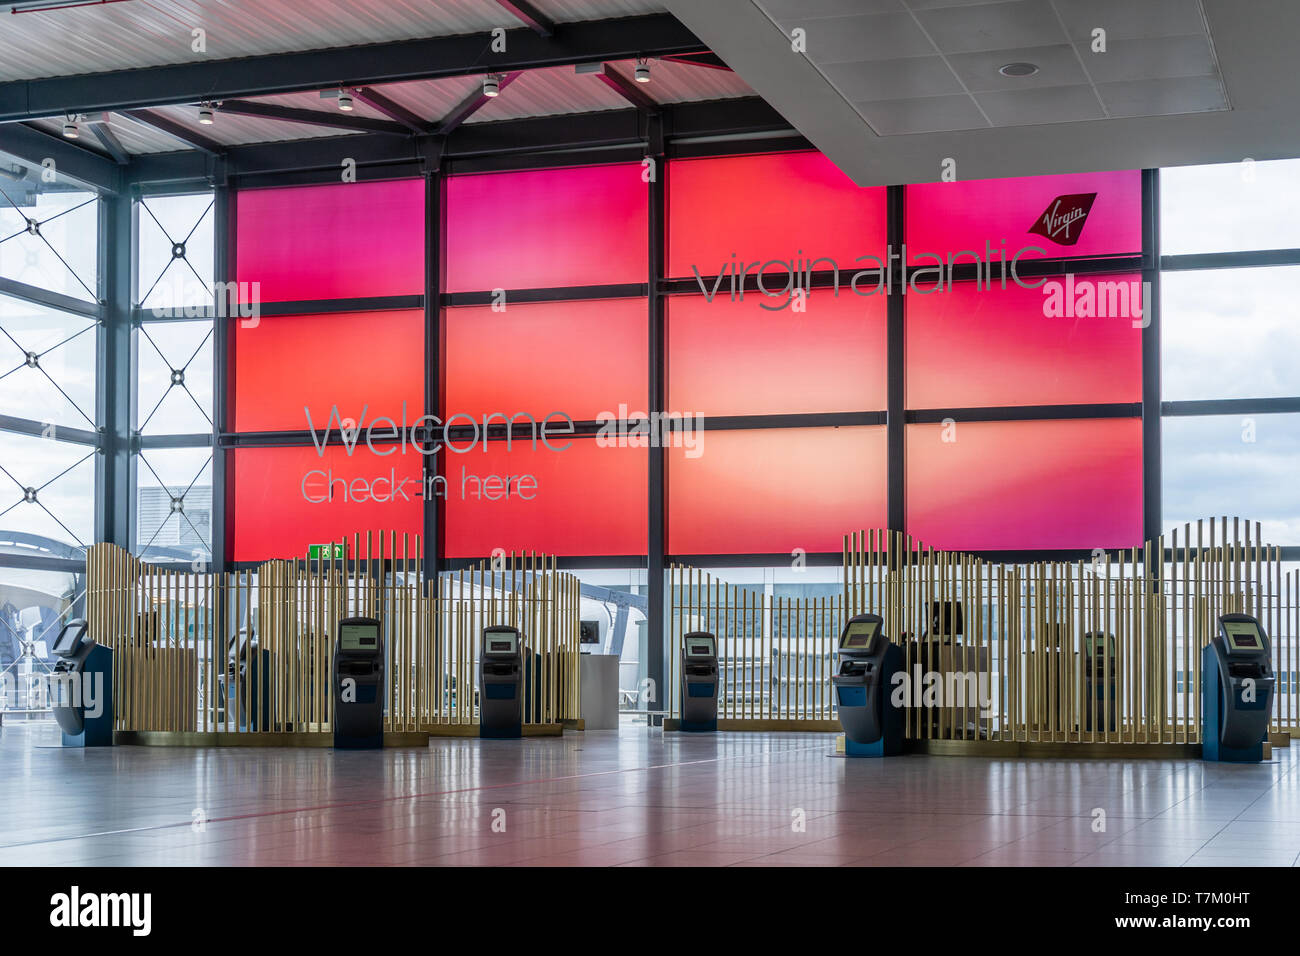 Automated check in area for Virgin Atlantic airline at Gatwick Airport, England, UK Stock Photo